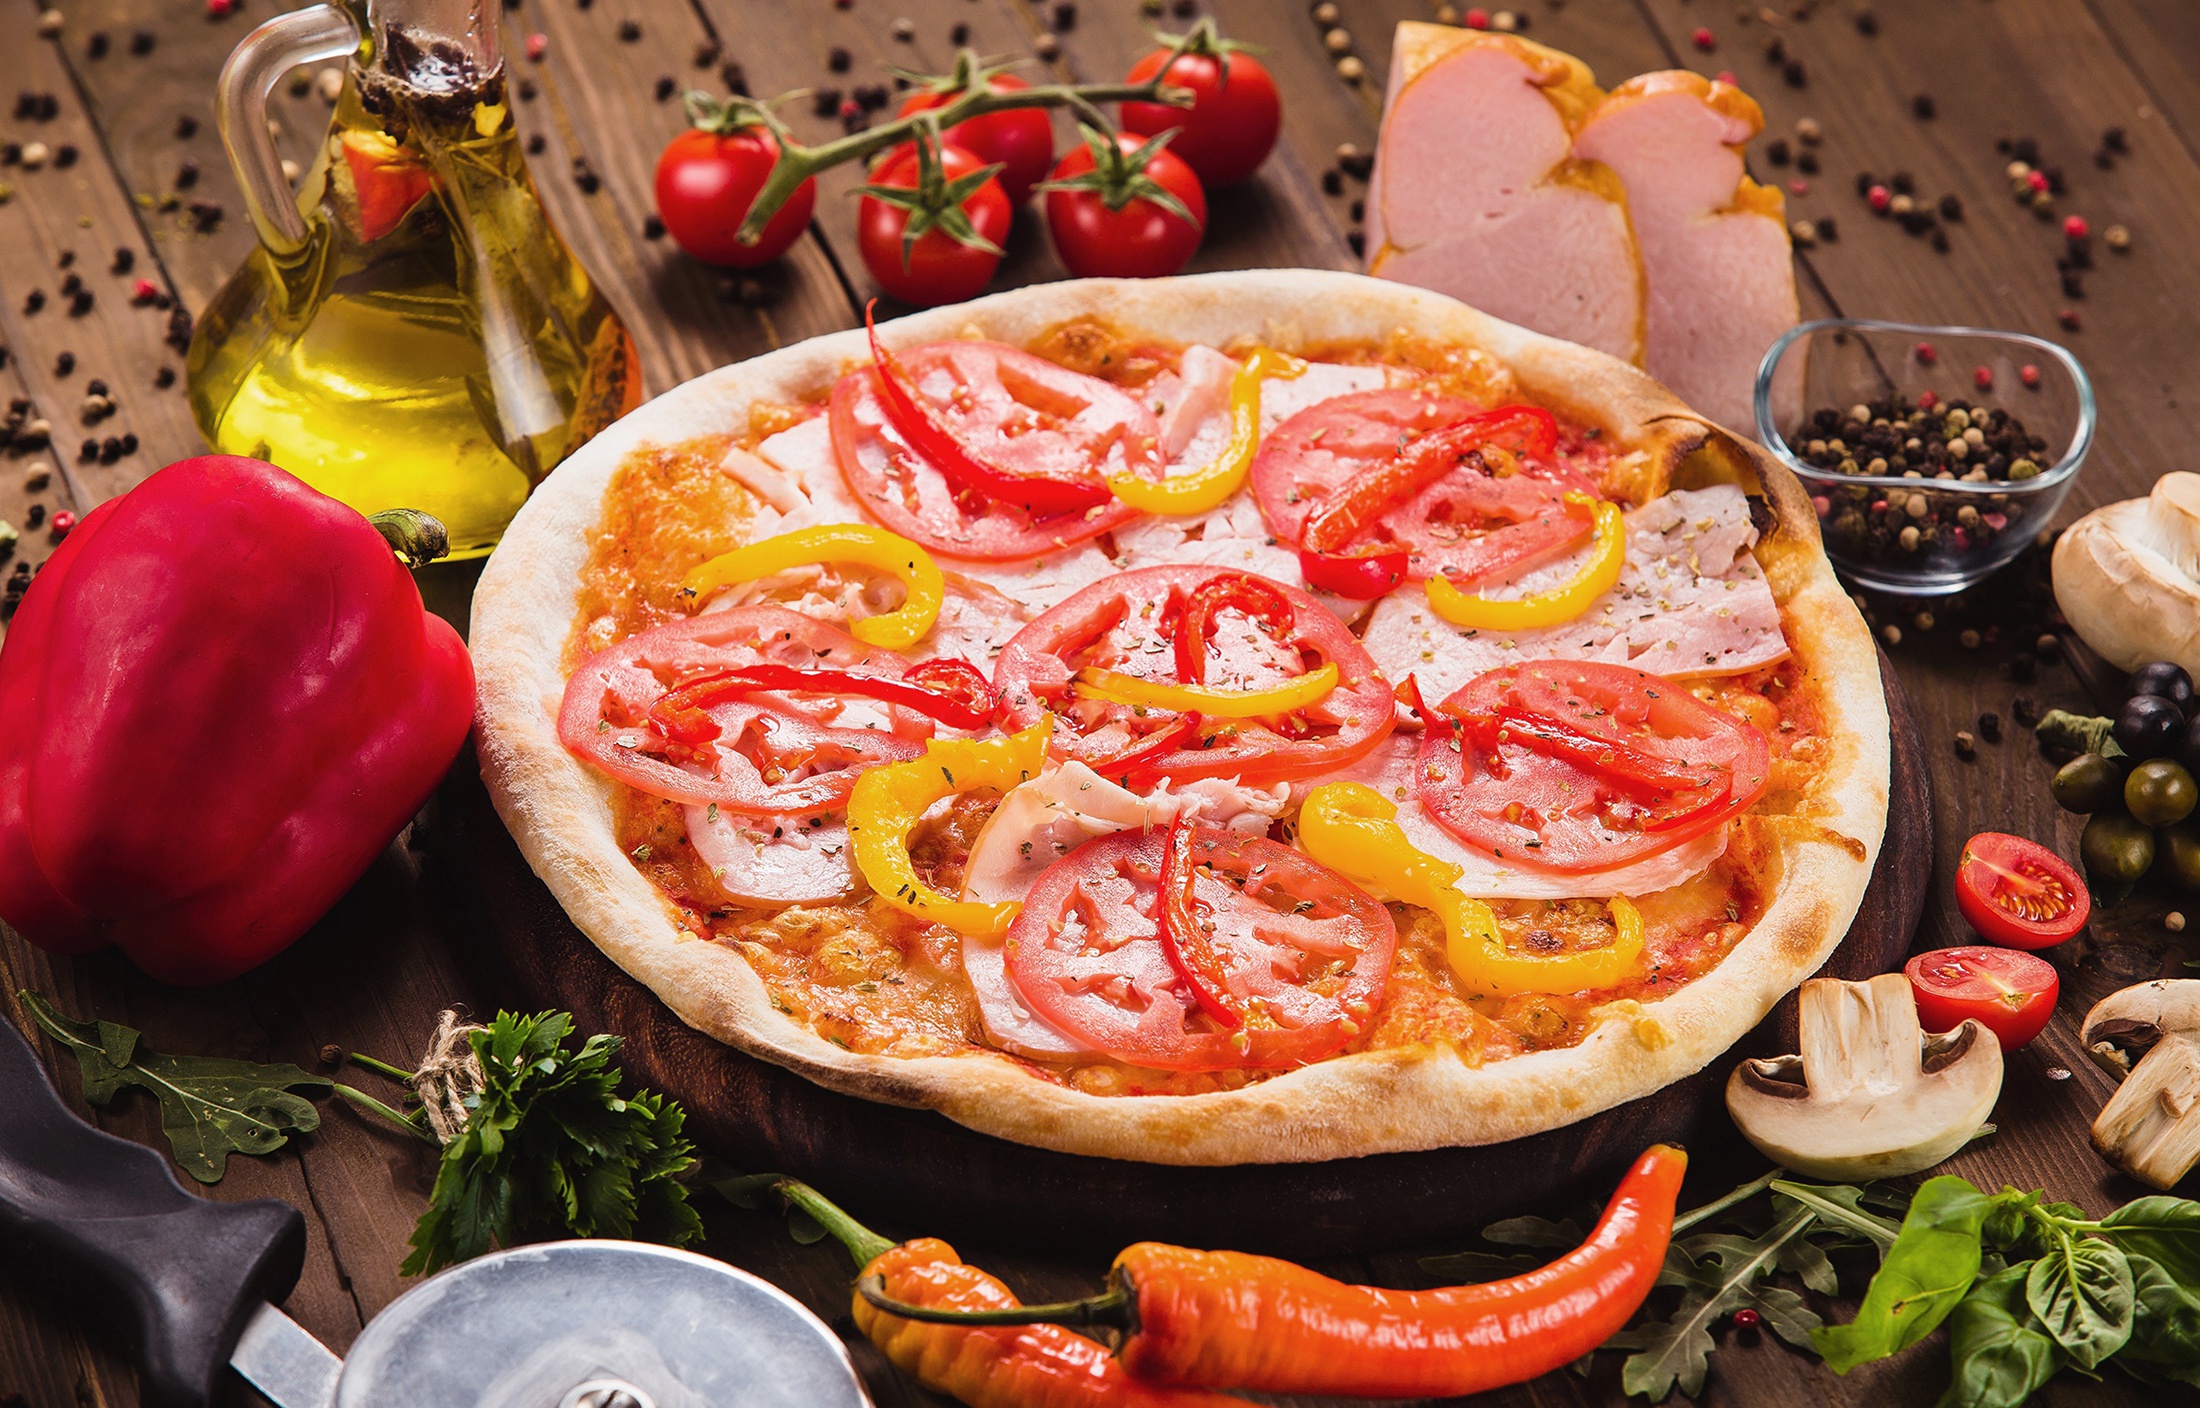 Food Pizza Vegetables Tomatoes Bell Peppers Olive Oil Mushroom Basil Chilli Peppers Olives Black Pep 2200x1408